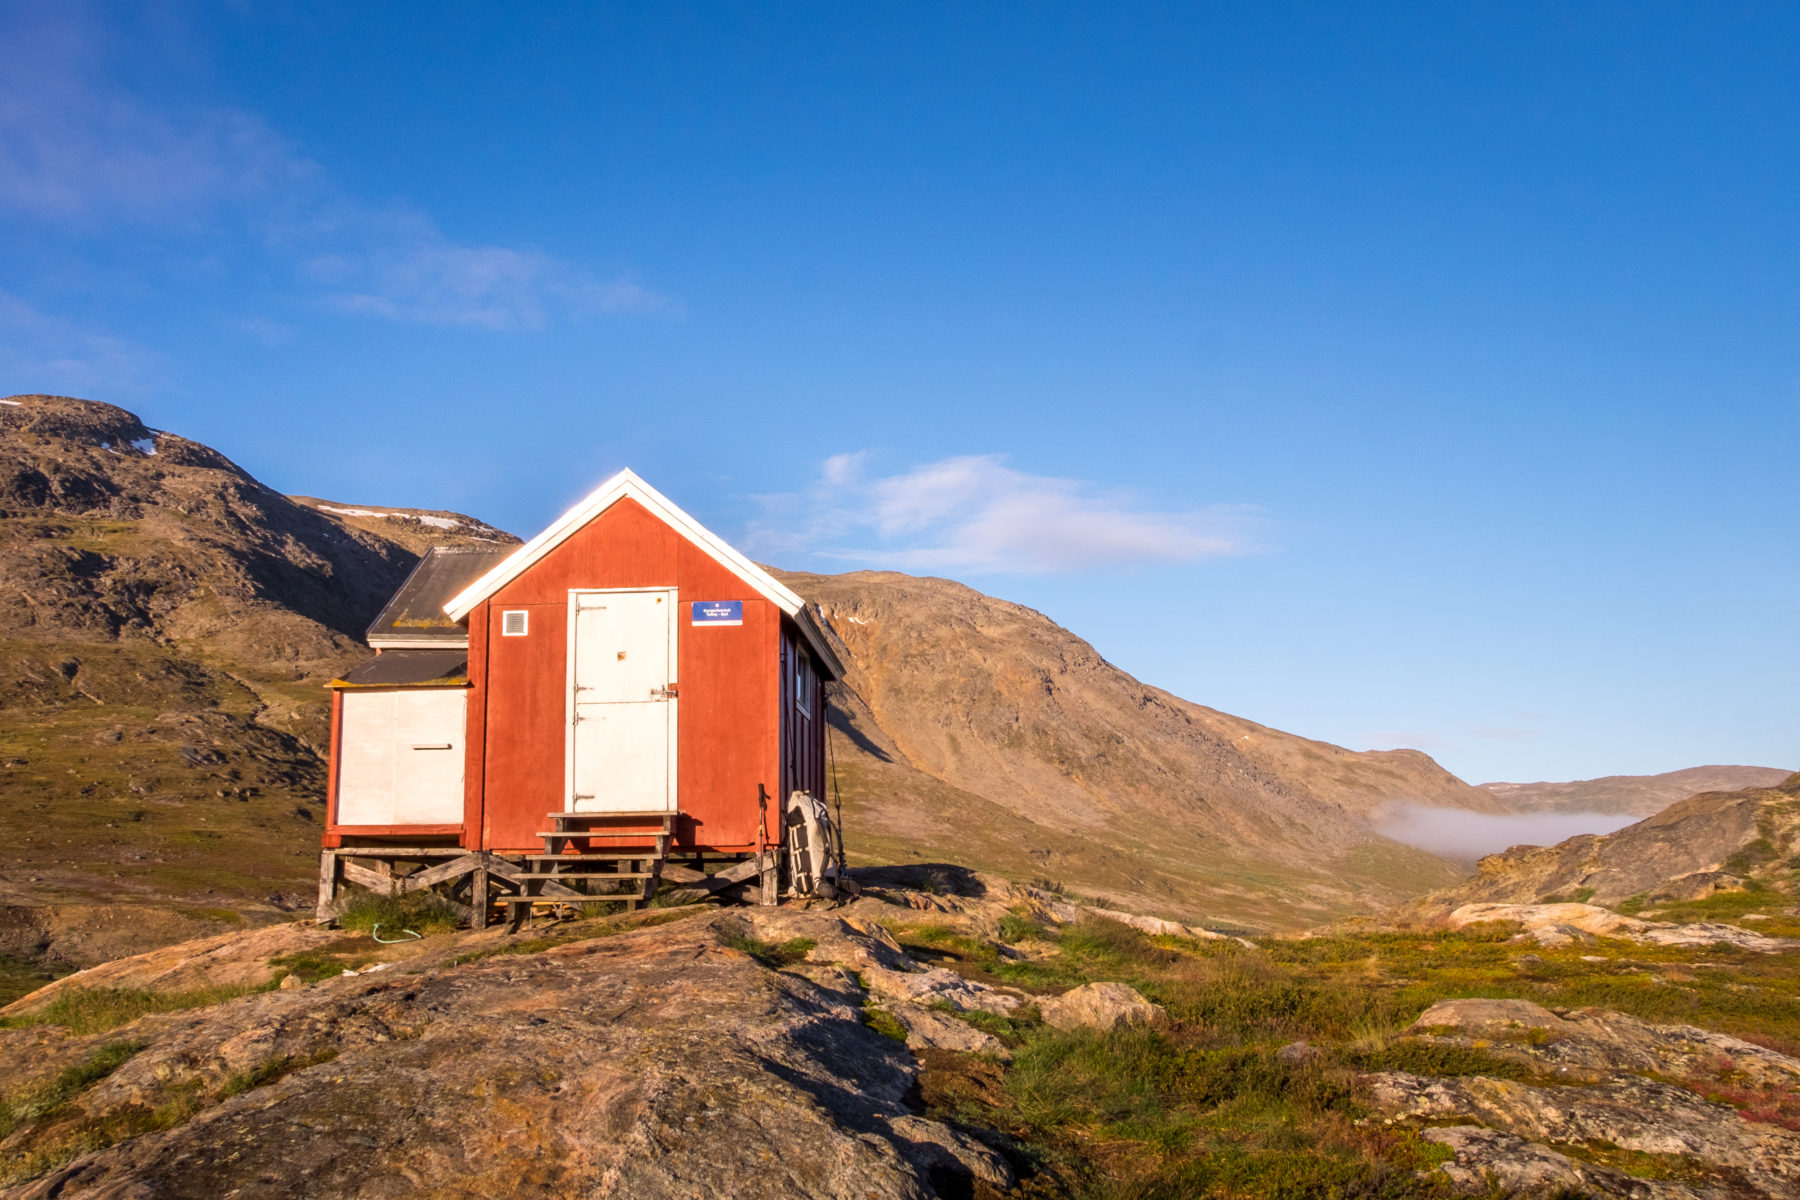 Kangerlusarsuk Tulleq Nord hut on the Arctic Circle Trail